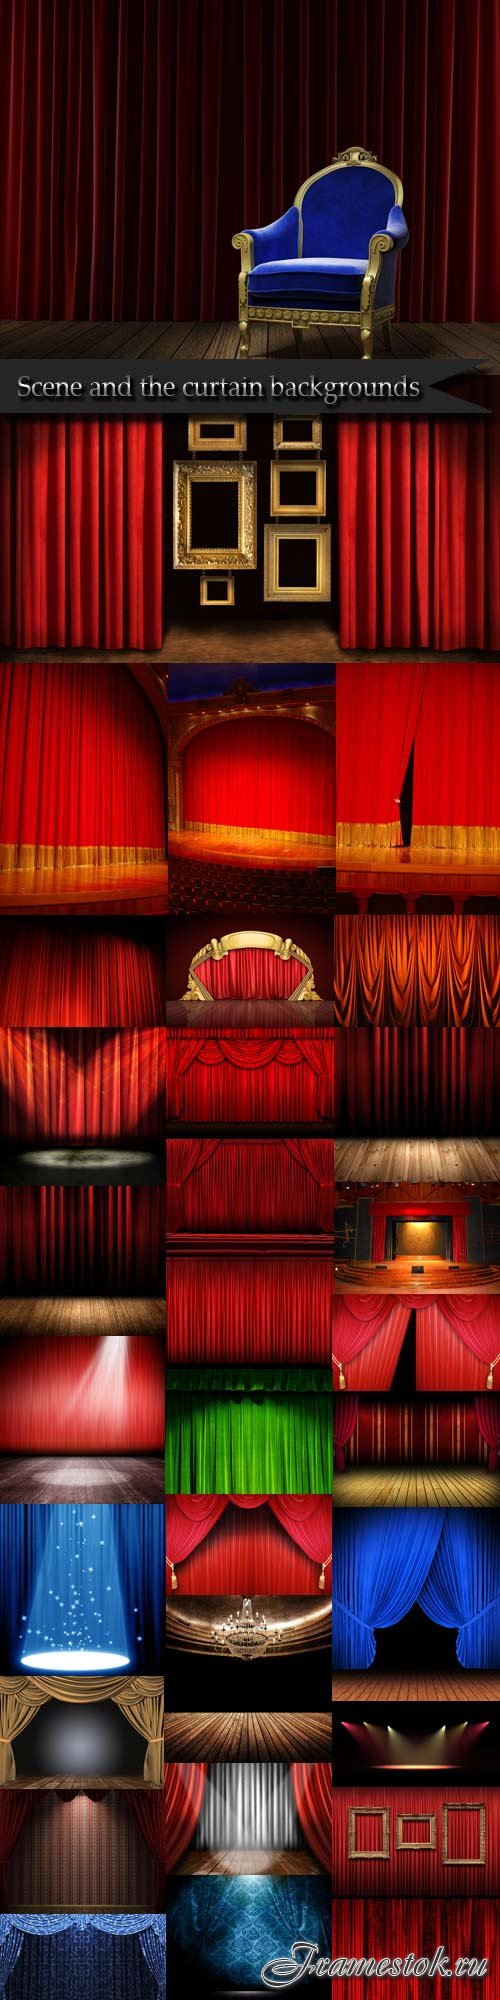 Scene and the curtain backgrounds